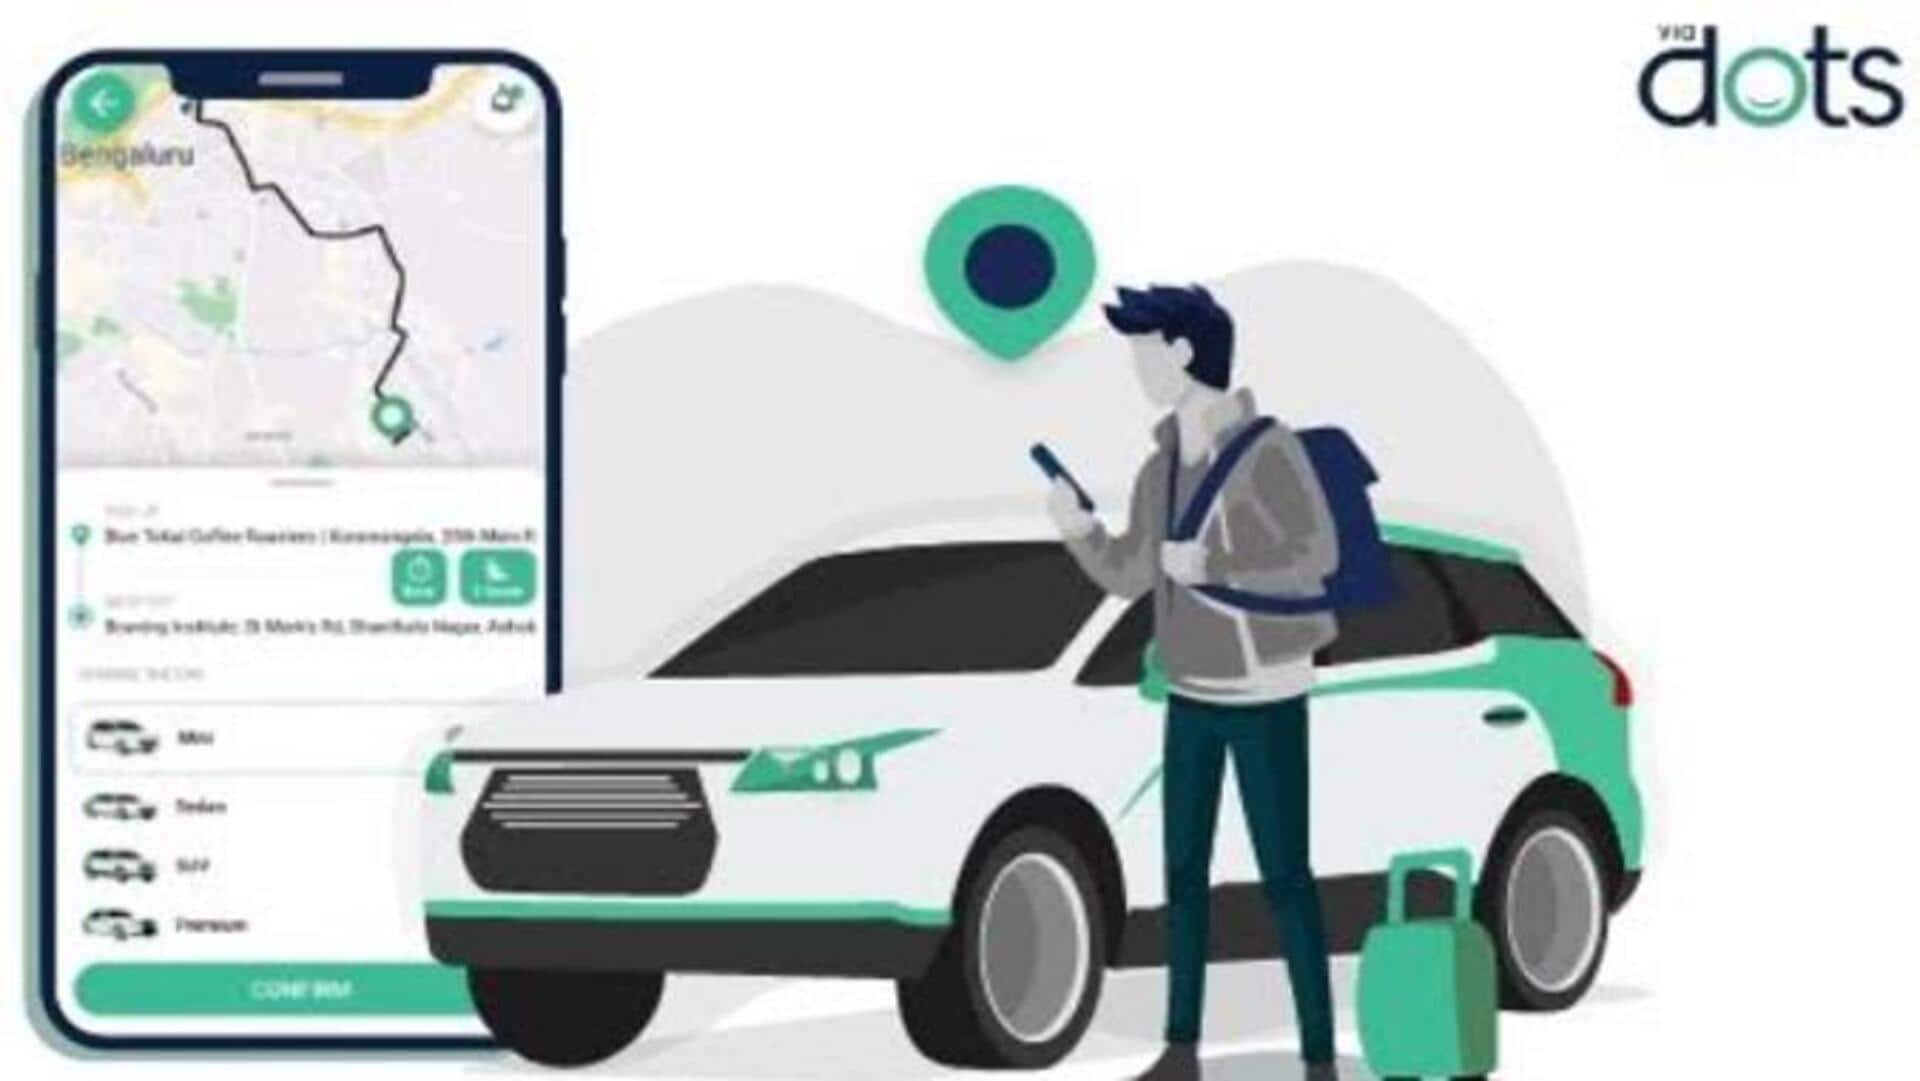 Ride-hailing start-up viaDOTS plans to recruit 50,000 cab drivers